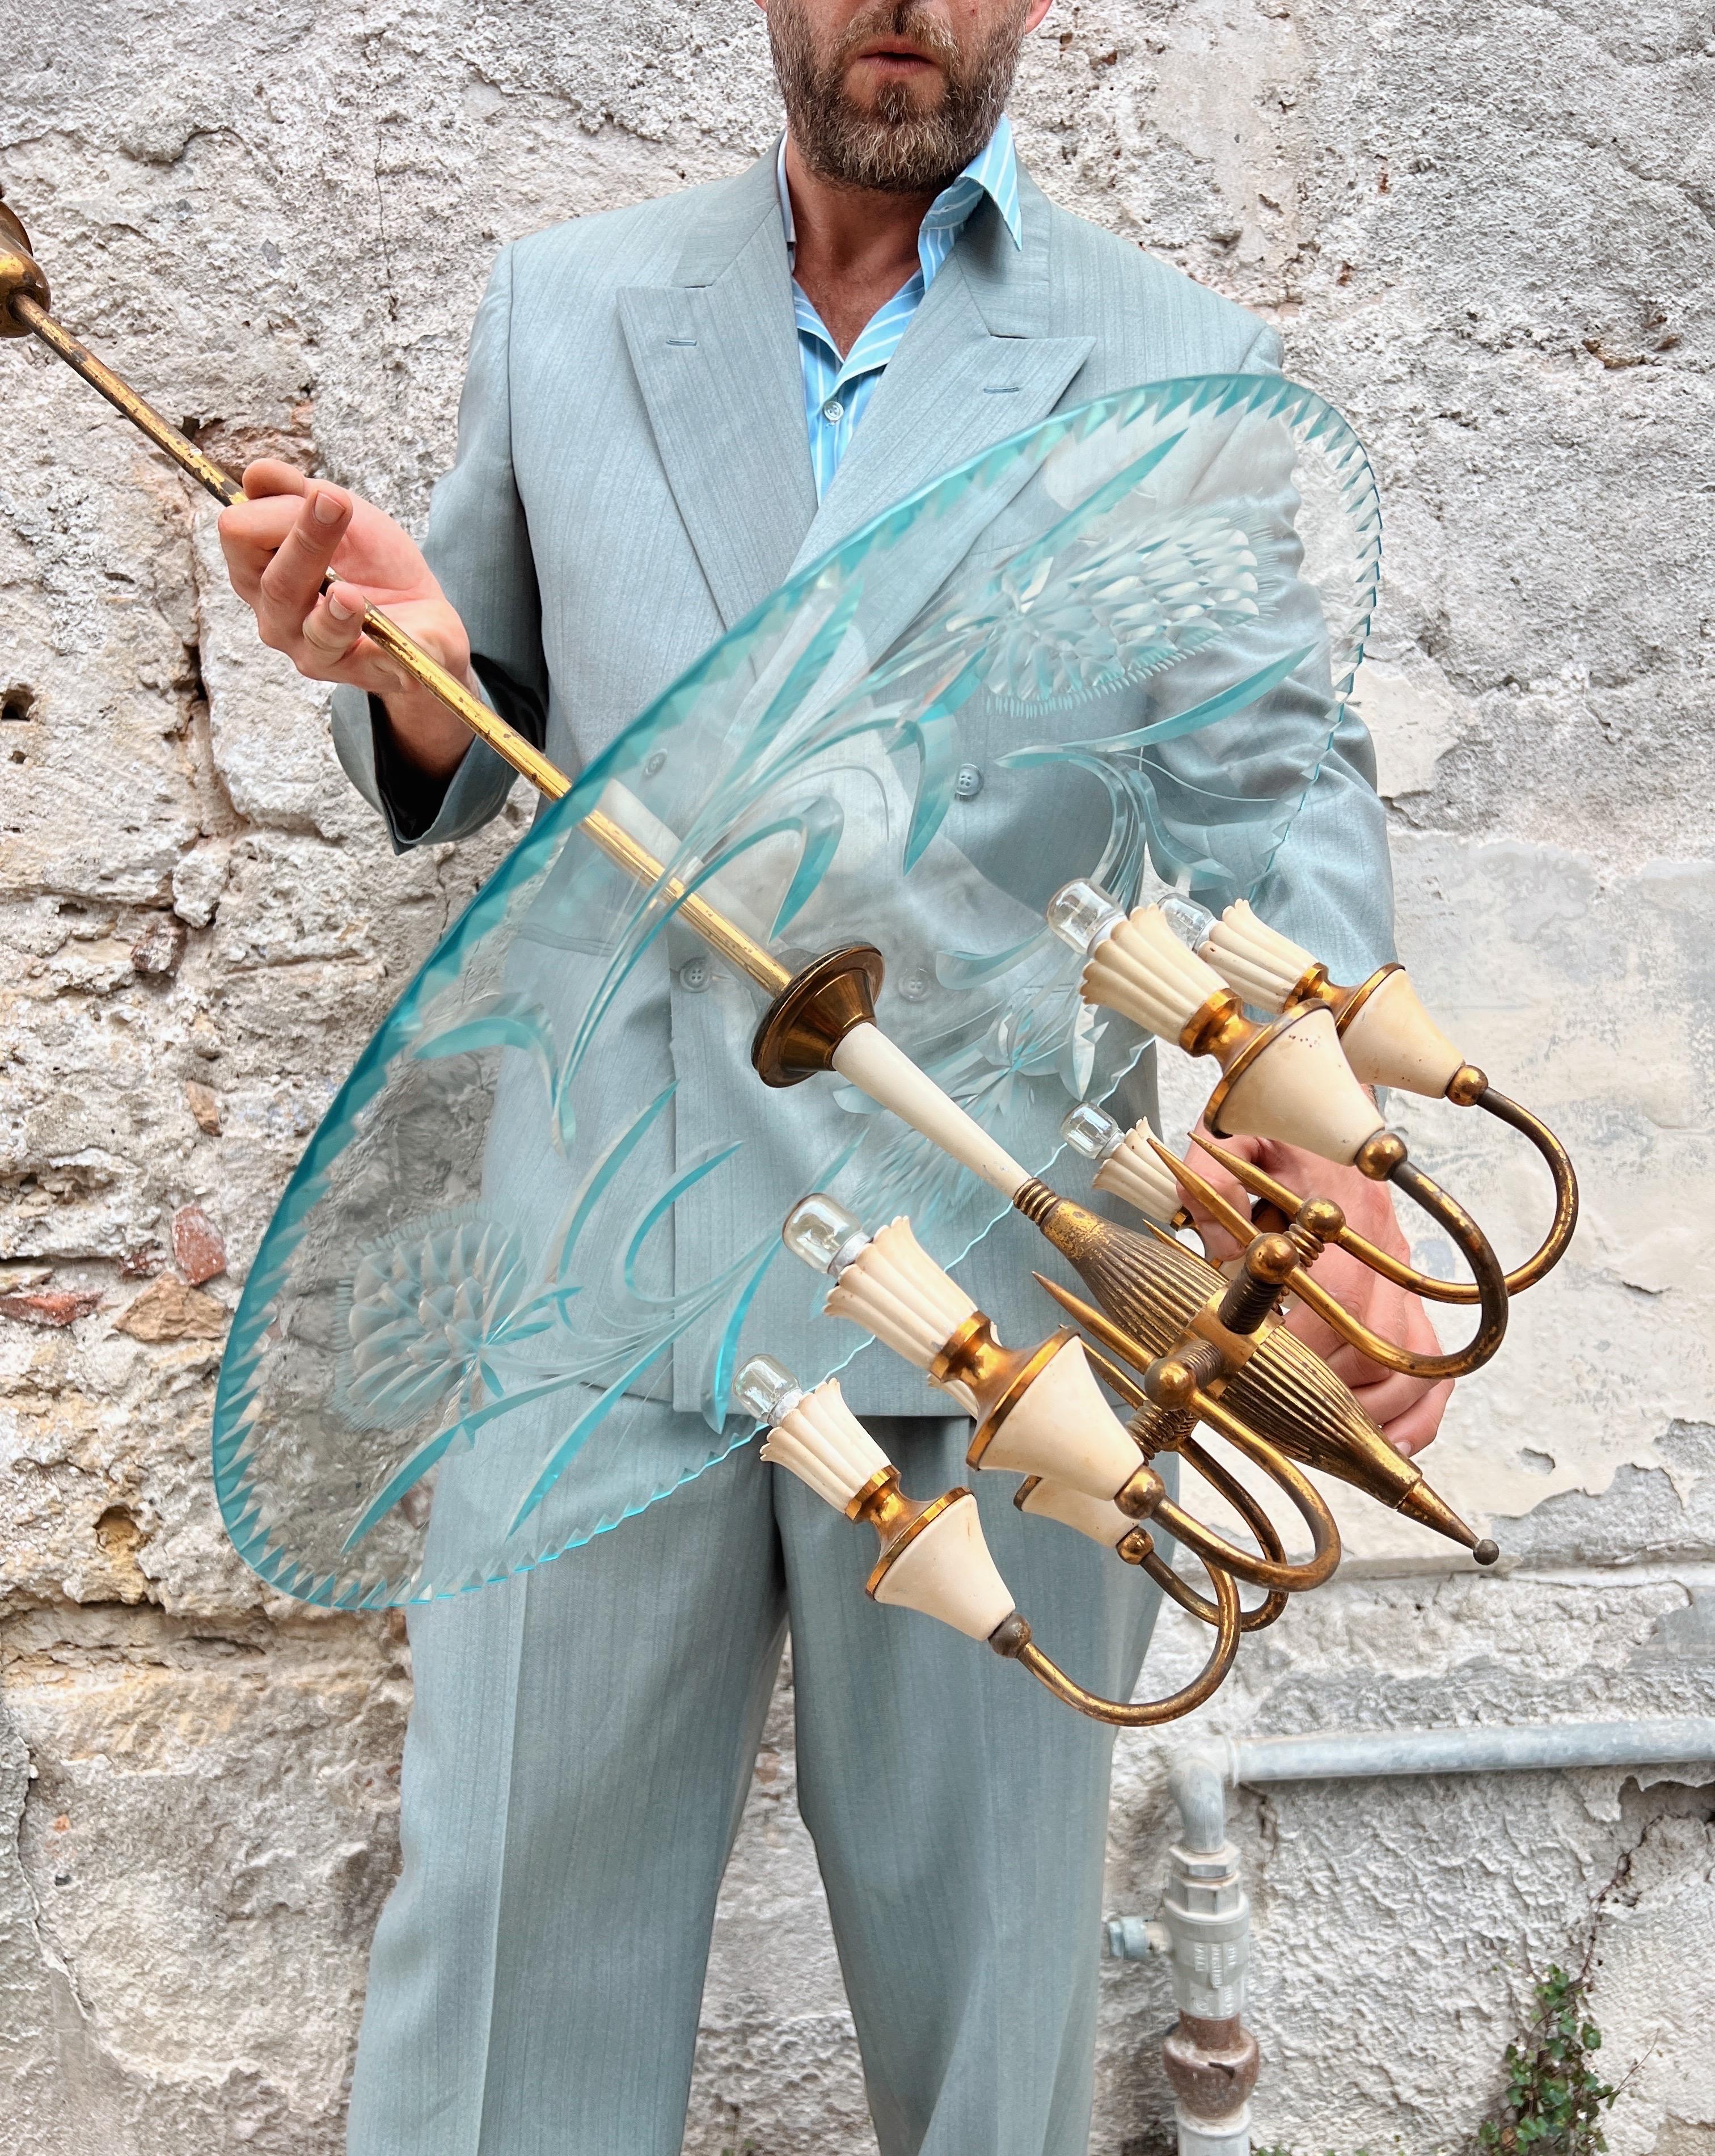 Introducing an exquisite Italian midcentury chandelier, designed by the iconic Pietro Chiesa, a true masterpiece of artistry.

This elegant and sober chandelier showcases stunning carved decorations on its glass, with a lovely hint of aquamarine